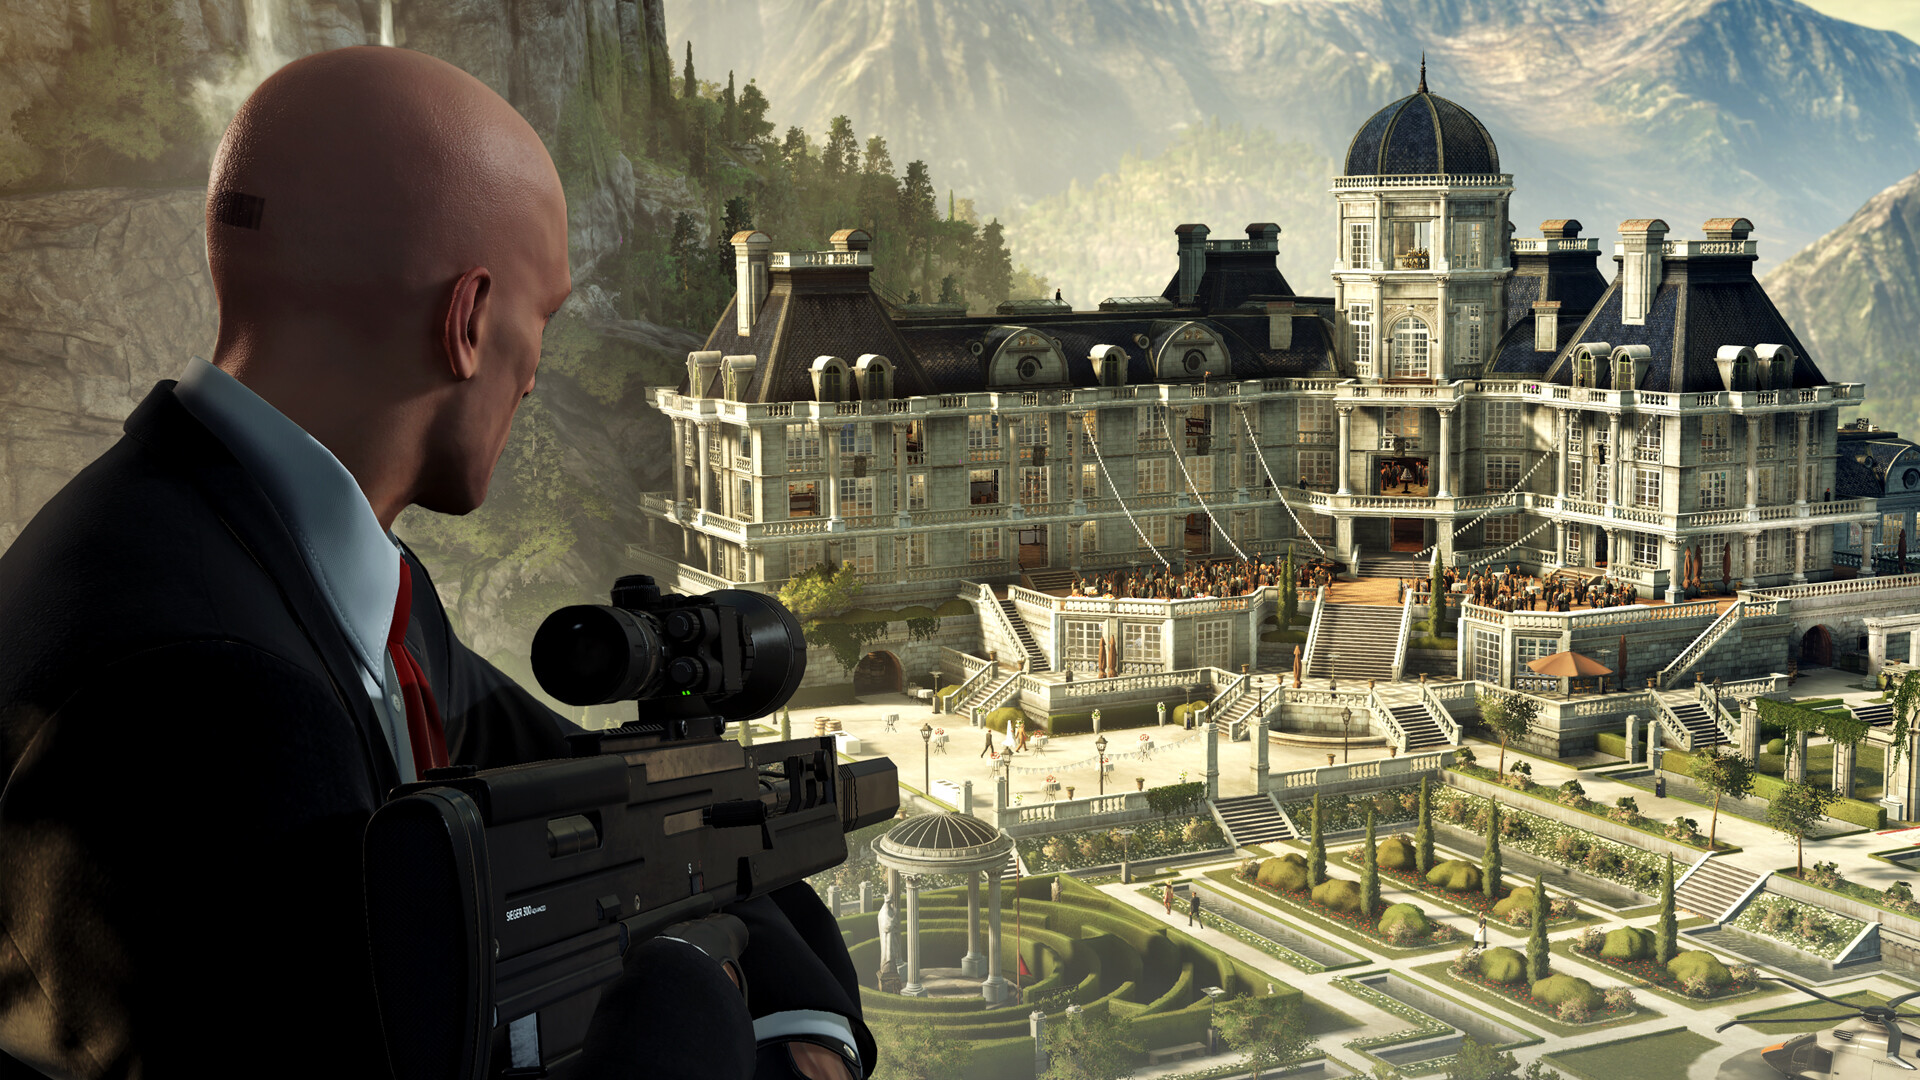 Hitman's Agent 47, overlooking a large villa and carrying a sniper rifle